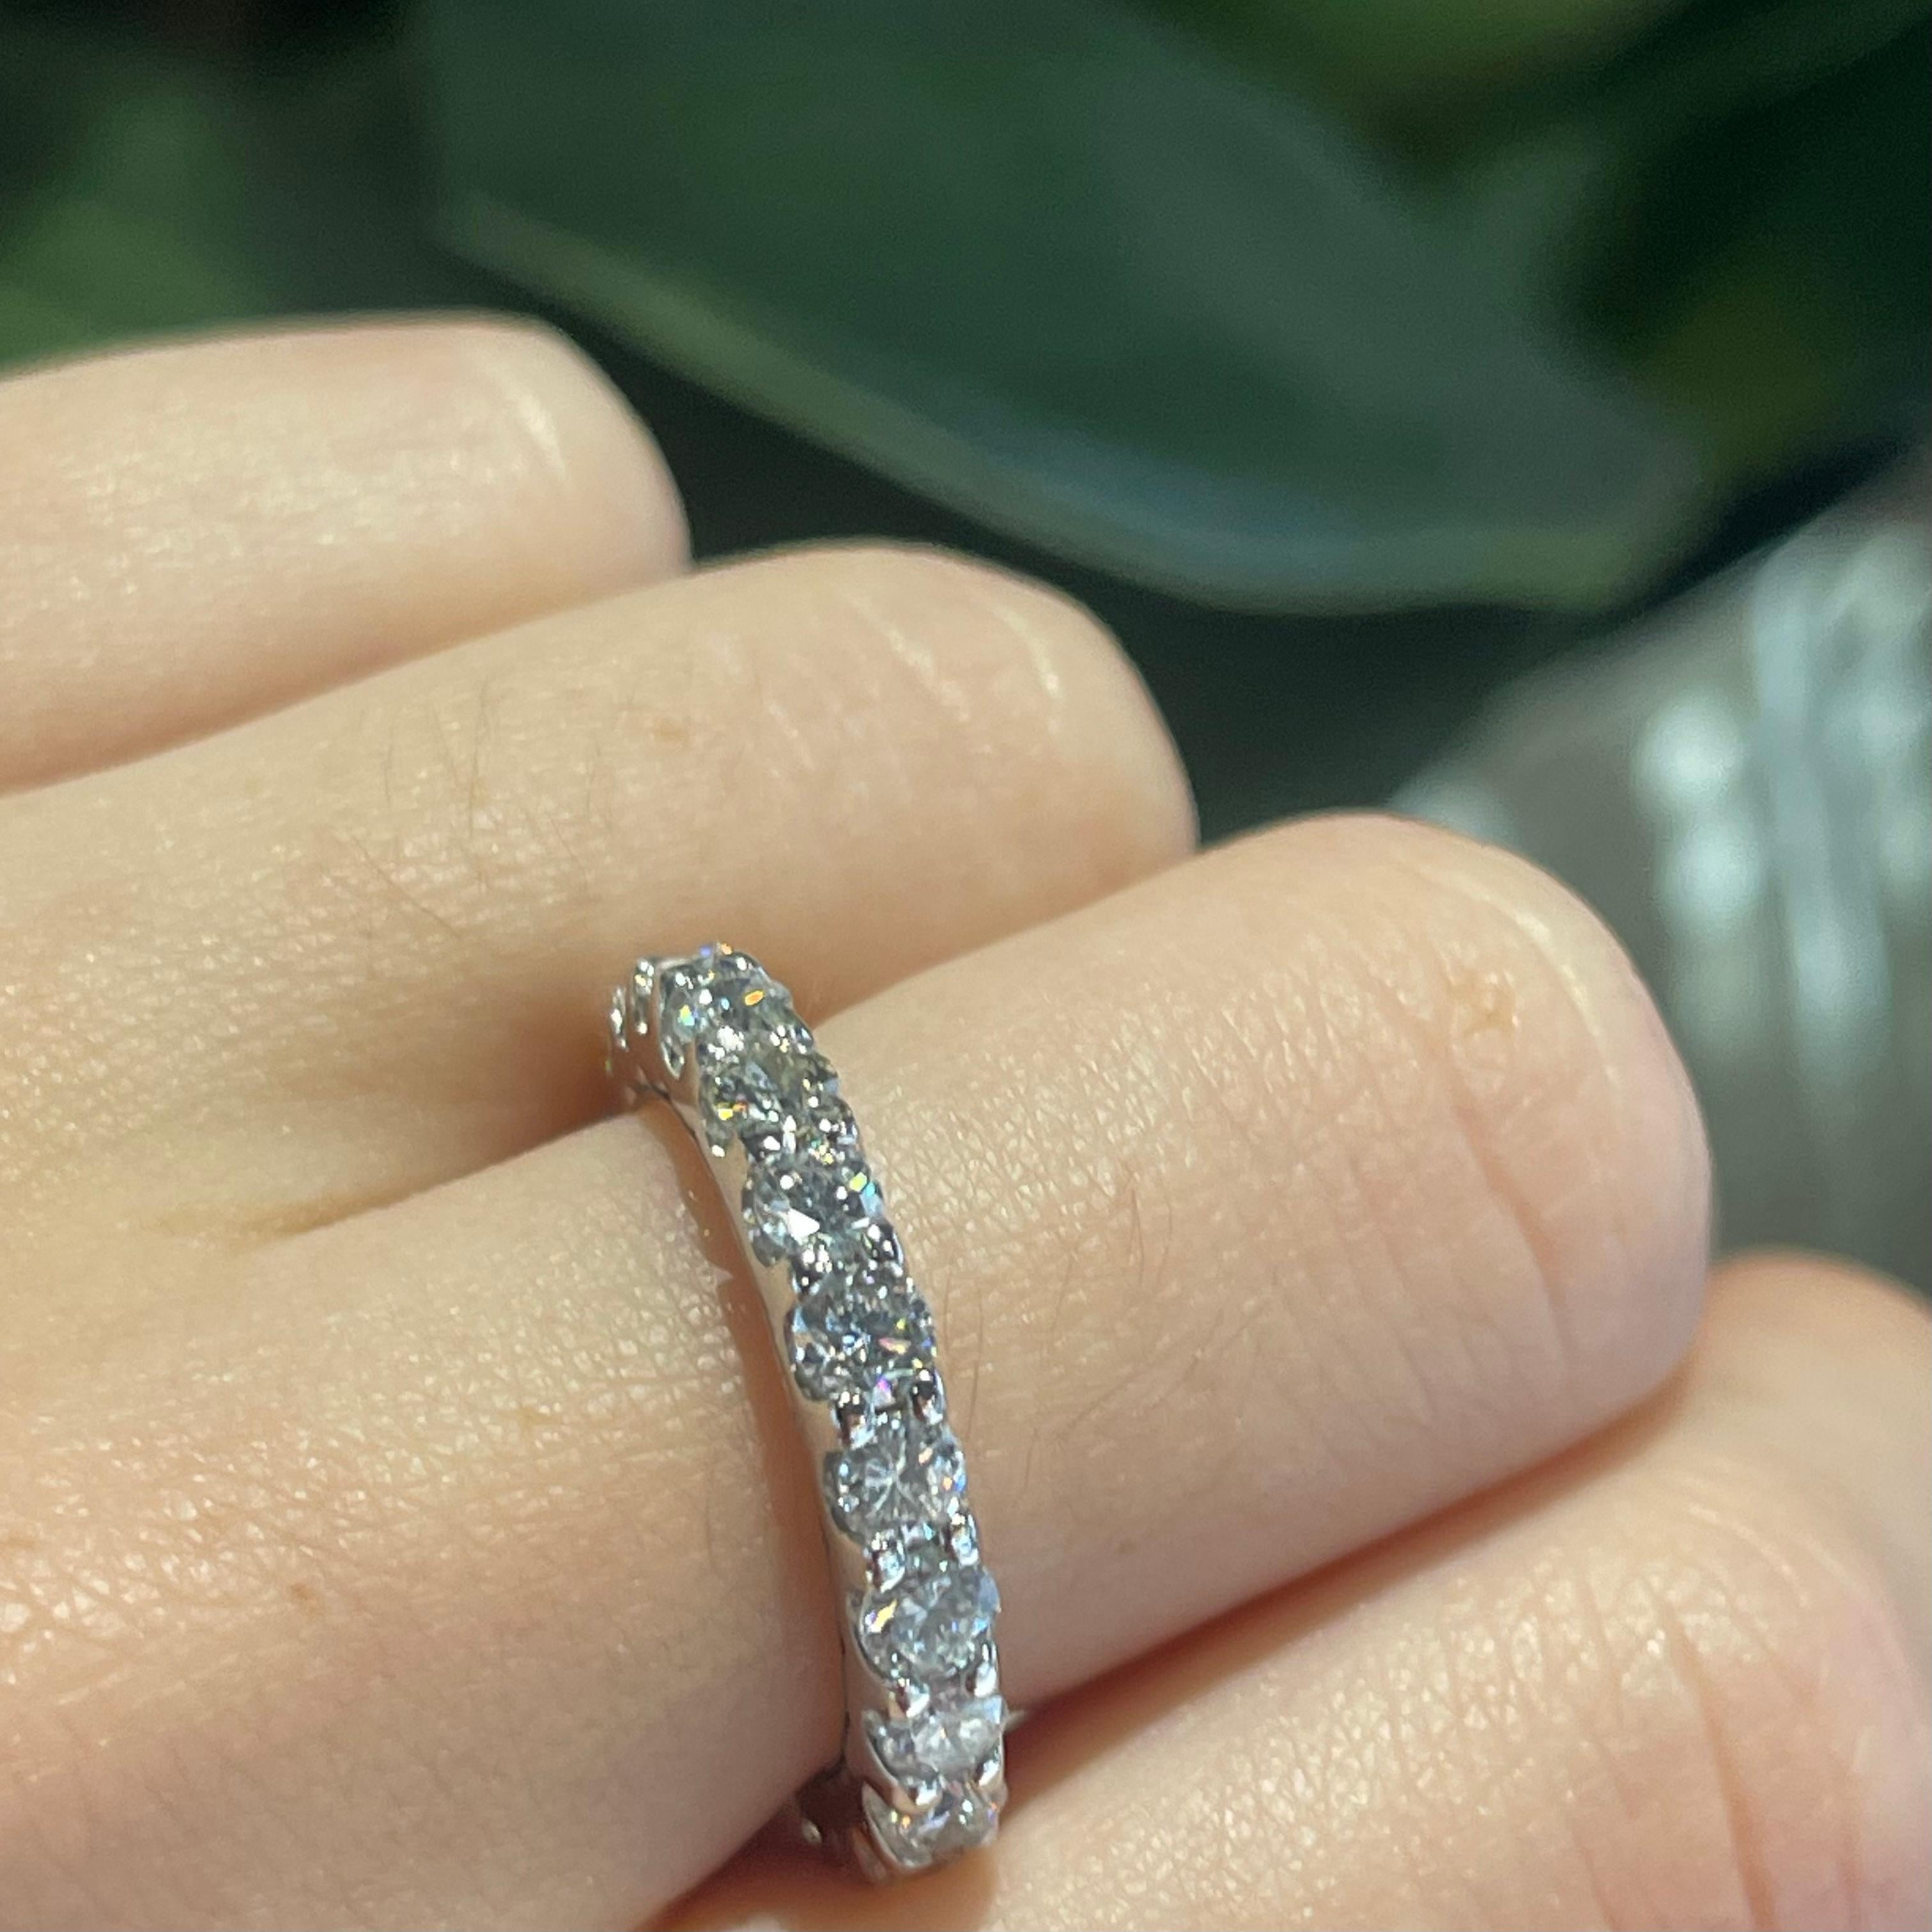 2.3 Carat Diamond Eternity Wedding Band in 14k White Gold In Excellent Condition For Sale In Miami, FL